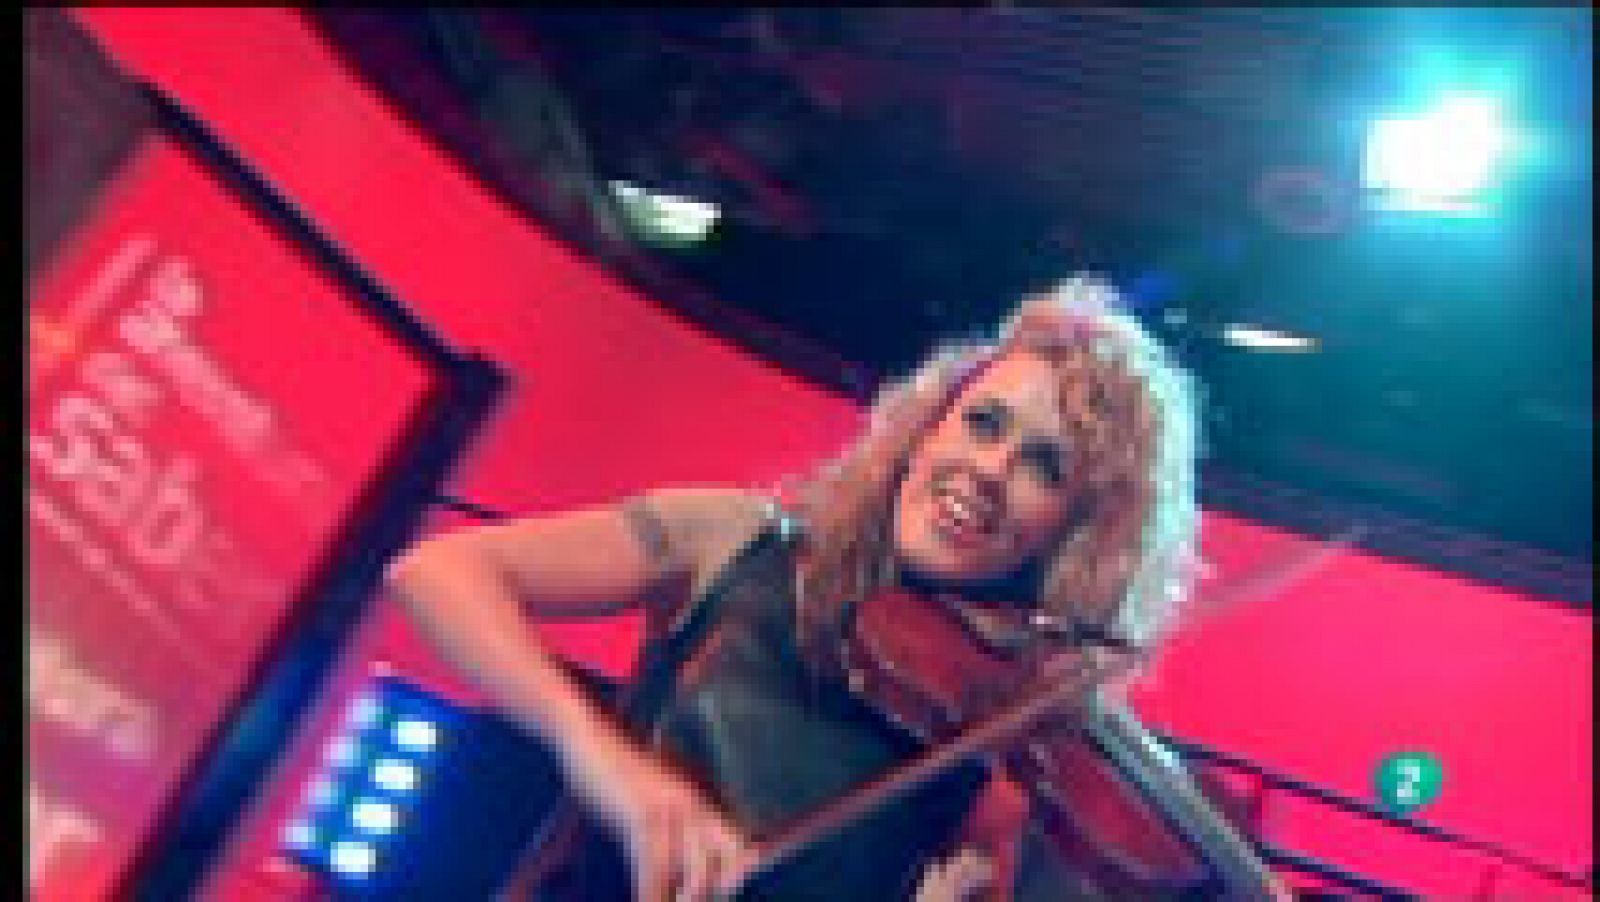 La aventura del Saber: La Aventura del Saber. Judith Mateo. Violinista. Highway to Hell | RTVE Play